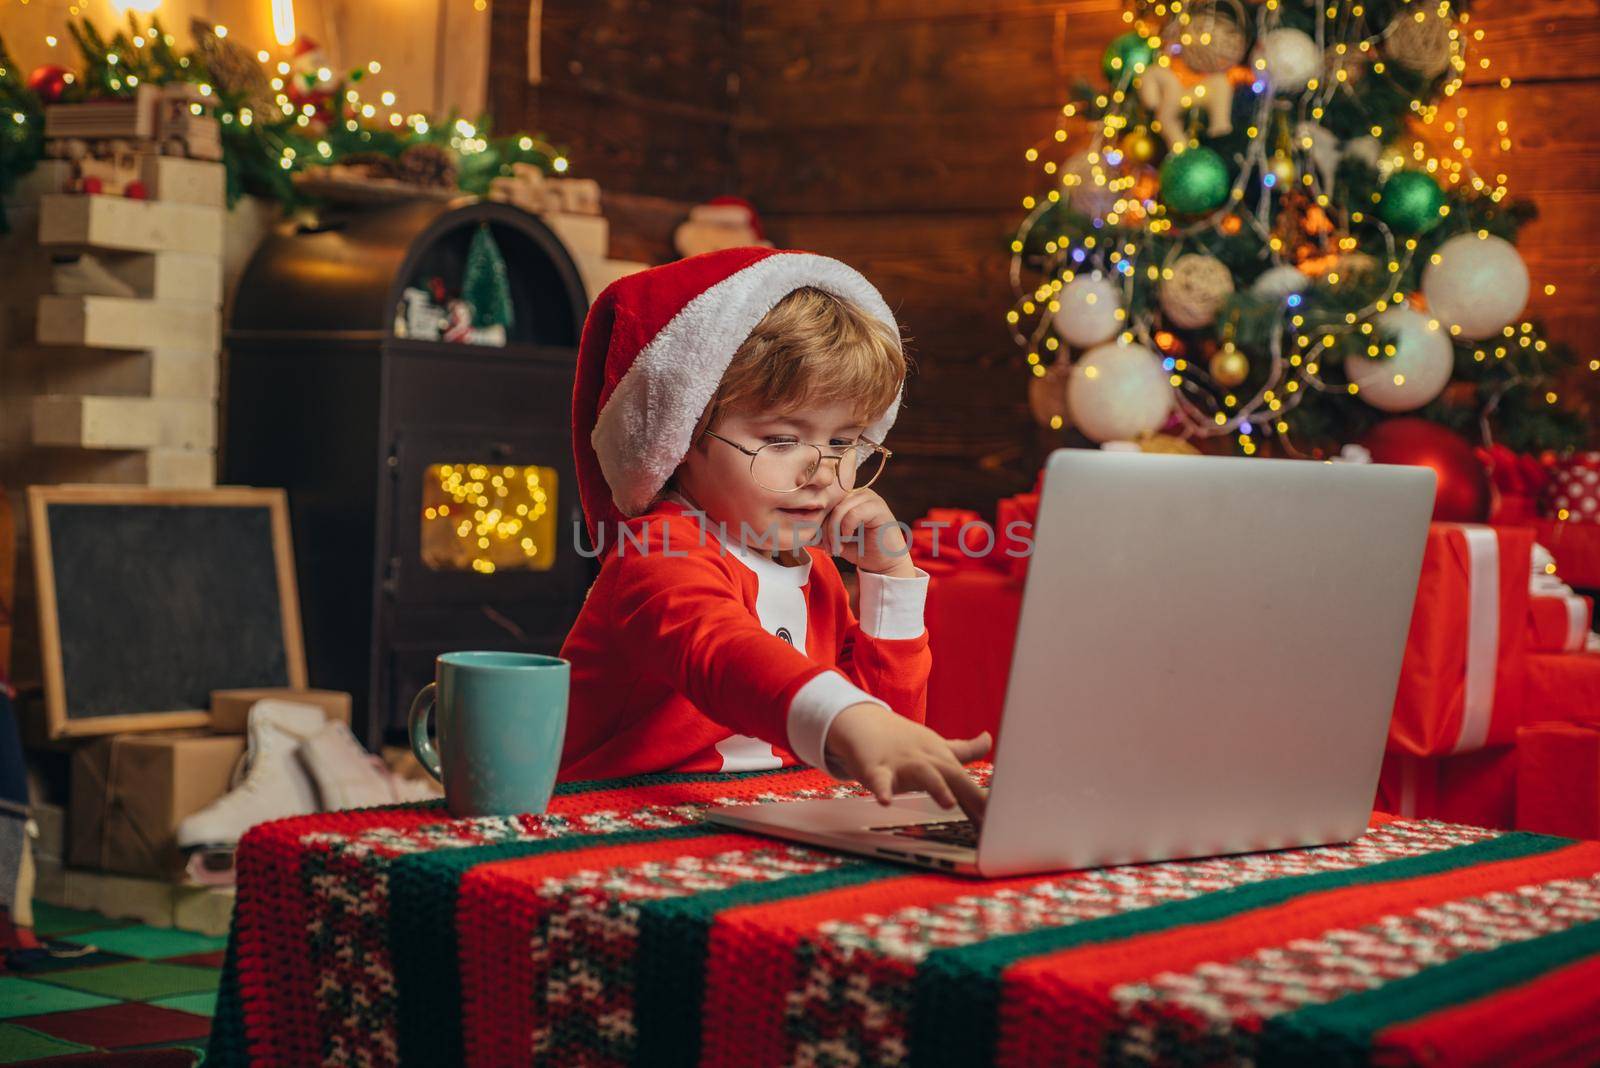 Gifts service. Smart toddler surfing internet. Helper of Santa with a Christmas magic gifts. Christmas. Home. Christmas time. Little boy in Santa hat and costume having fun. by Tverdokhlib